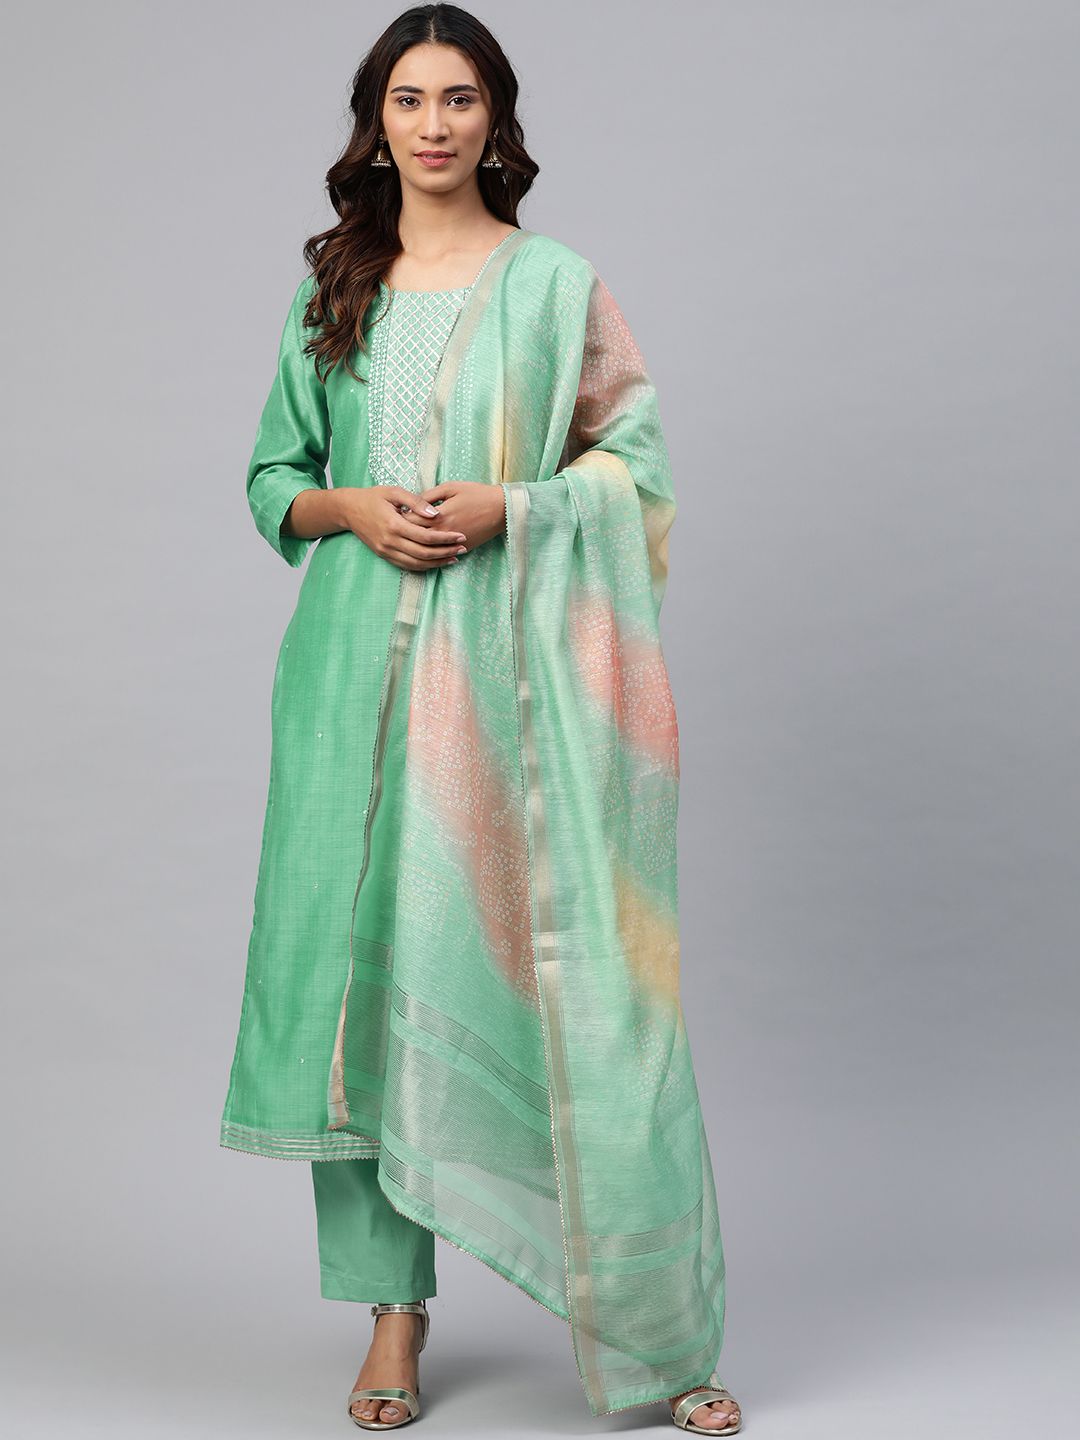 Readiprint Fashions Green Embellished Unstitched Dress Material With Dupatta Price in India